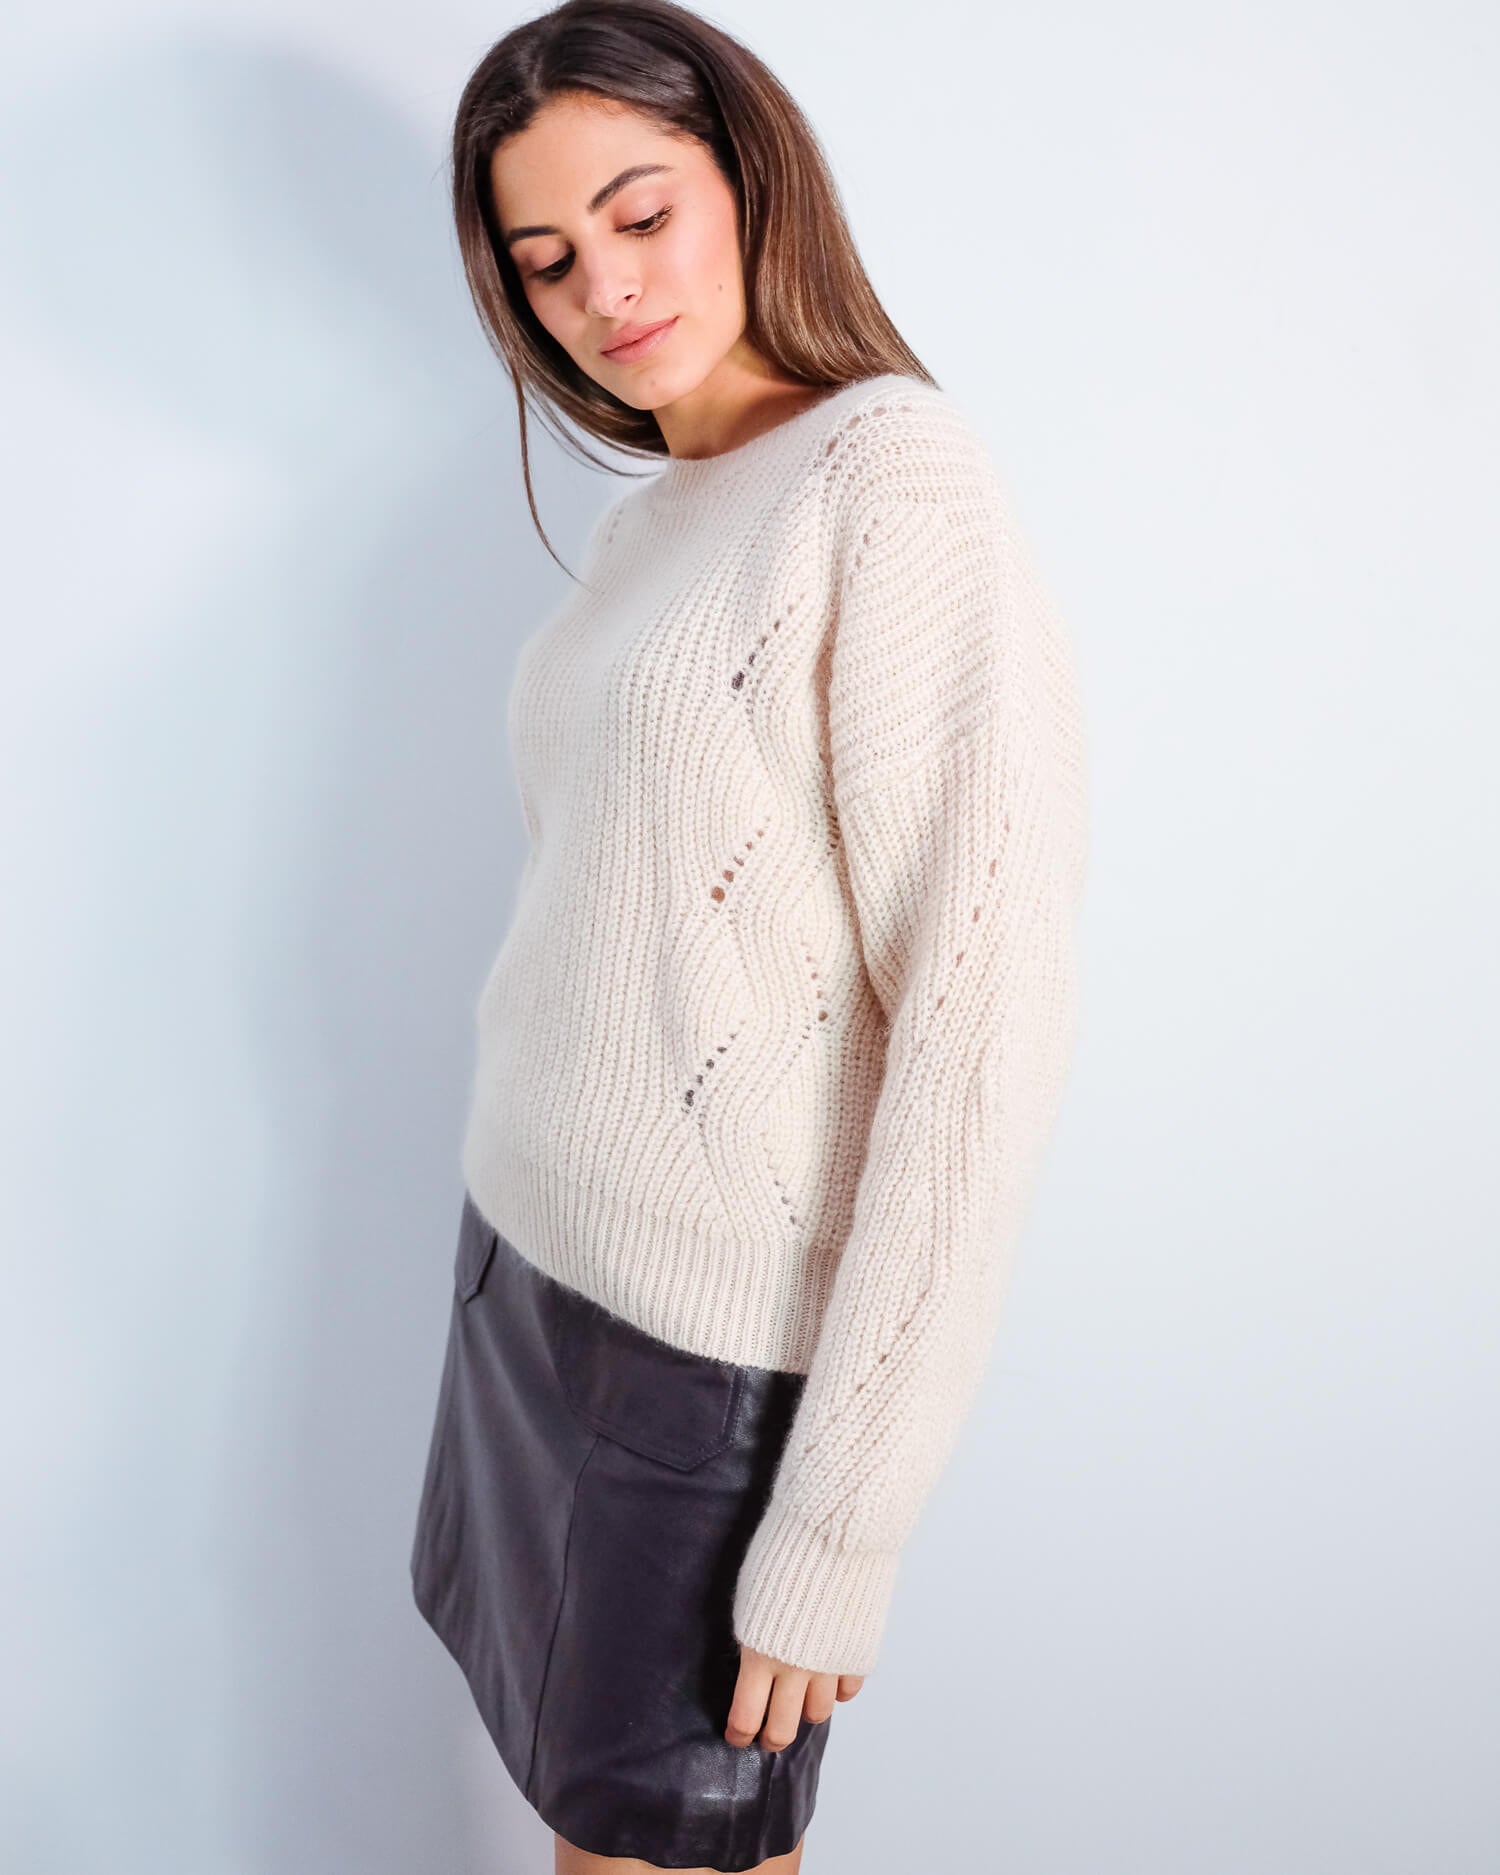 EA Vally knit in white